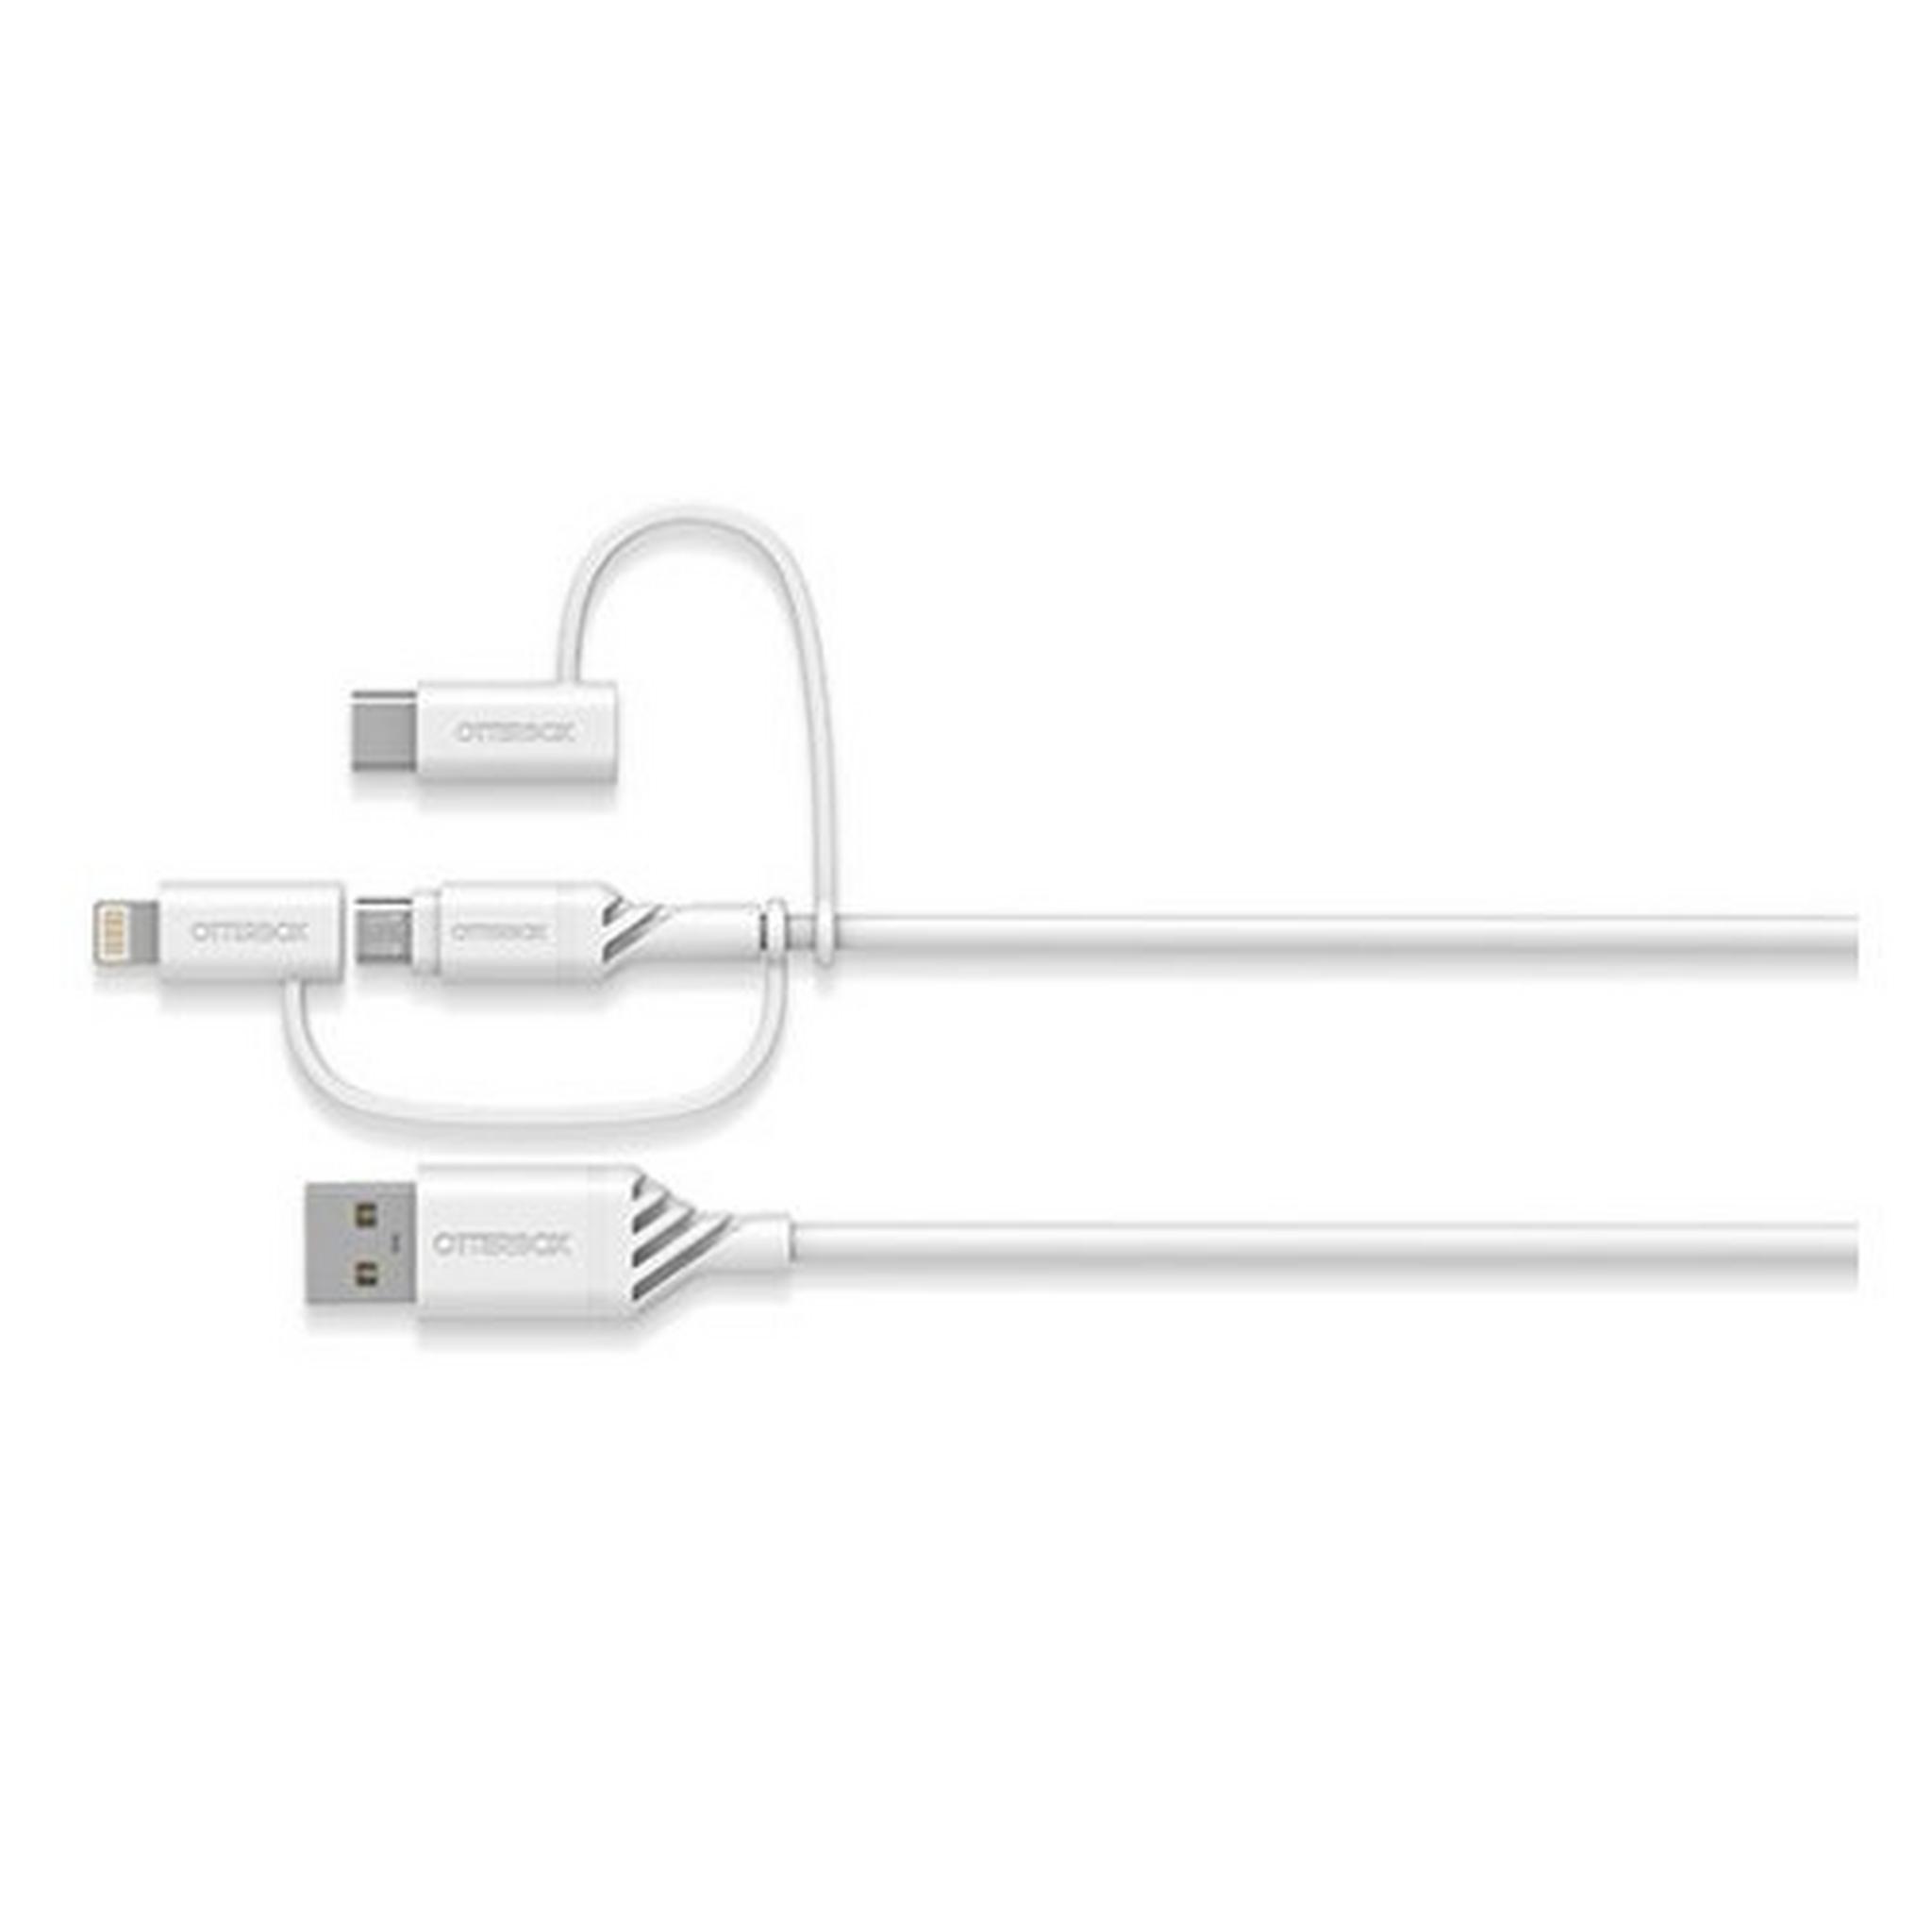 OtterBox 3 in 1 USB-A to Micro/Lightning/USB-C Cable - White